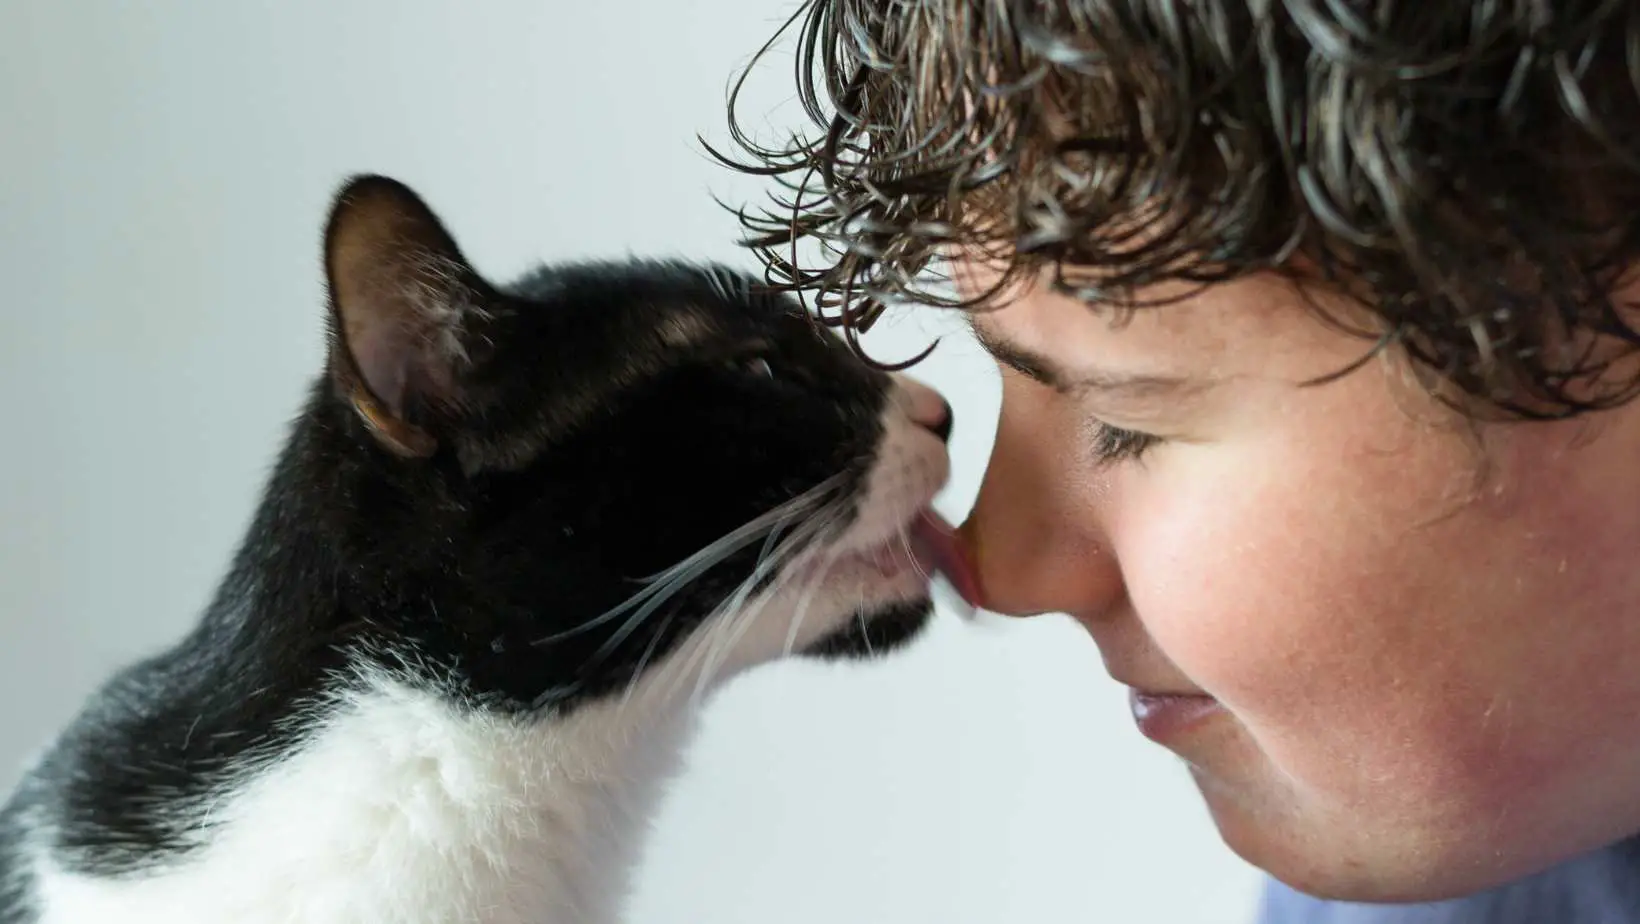 What does it mean if your cat licks you? Why It Matters/What does it mean if my cat licks me?